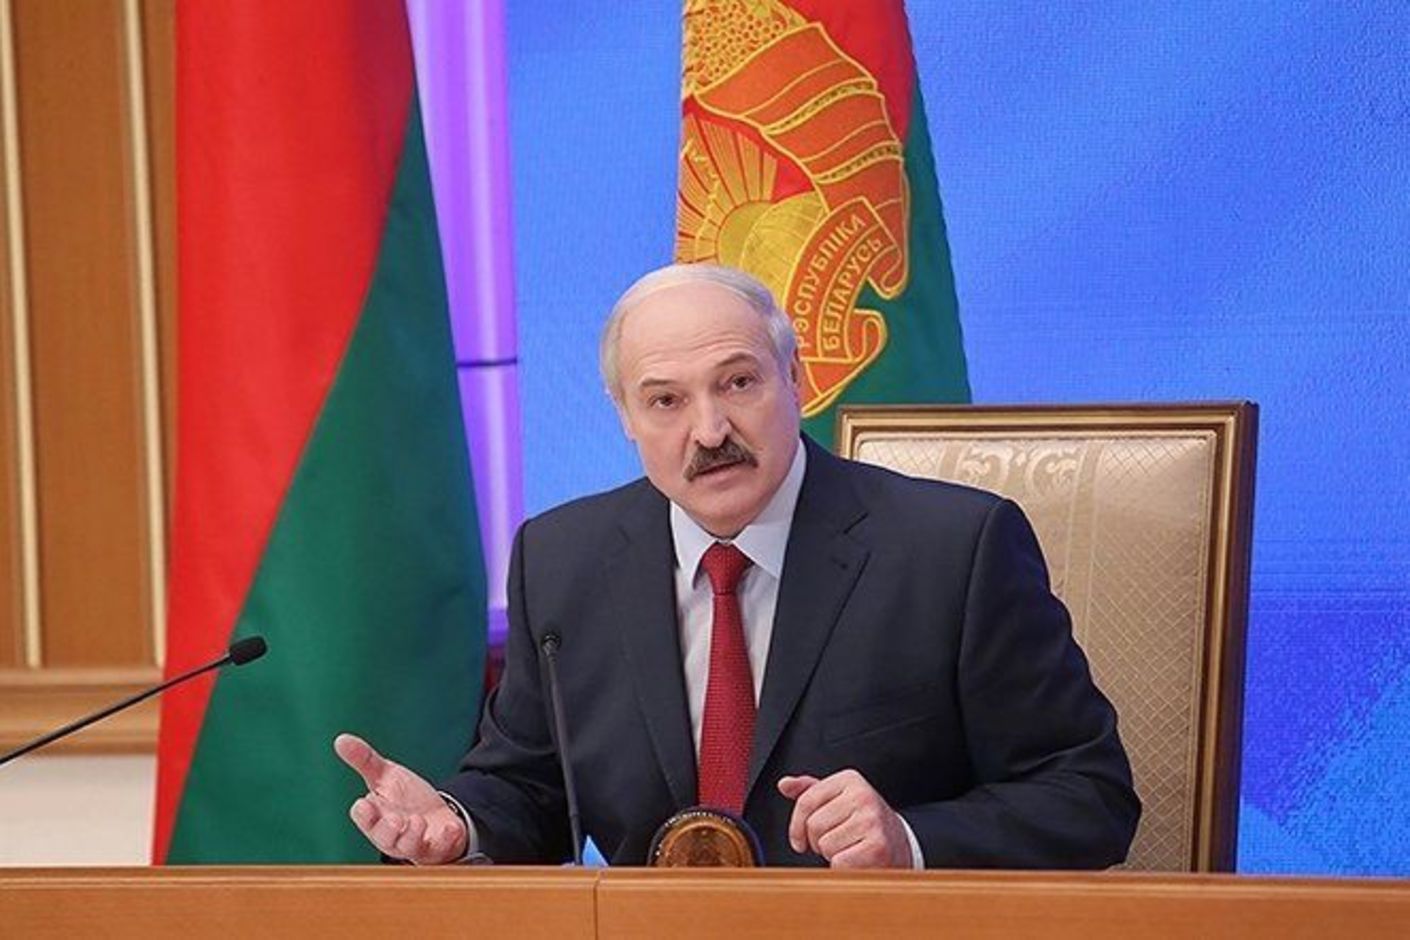 Amid real cooperation in a ‘competitive mode’, Belarus and Russia exchange grievances through media